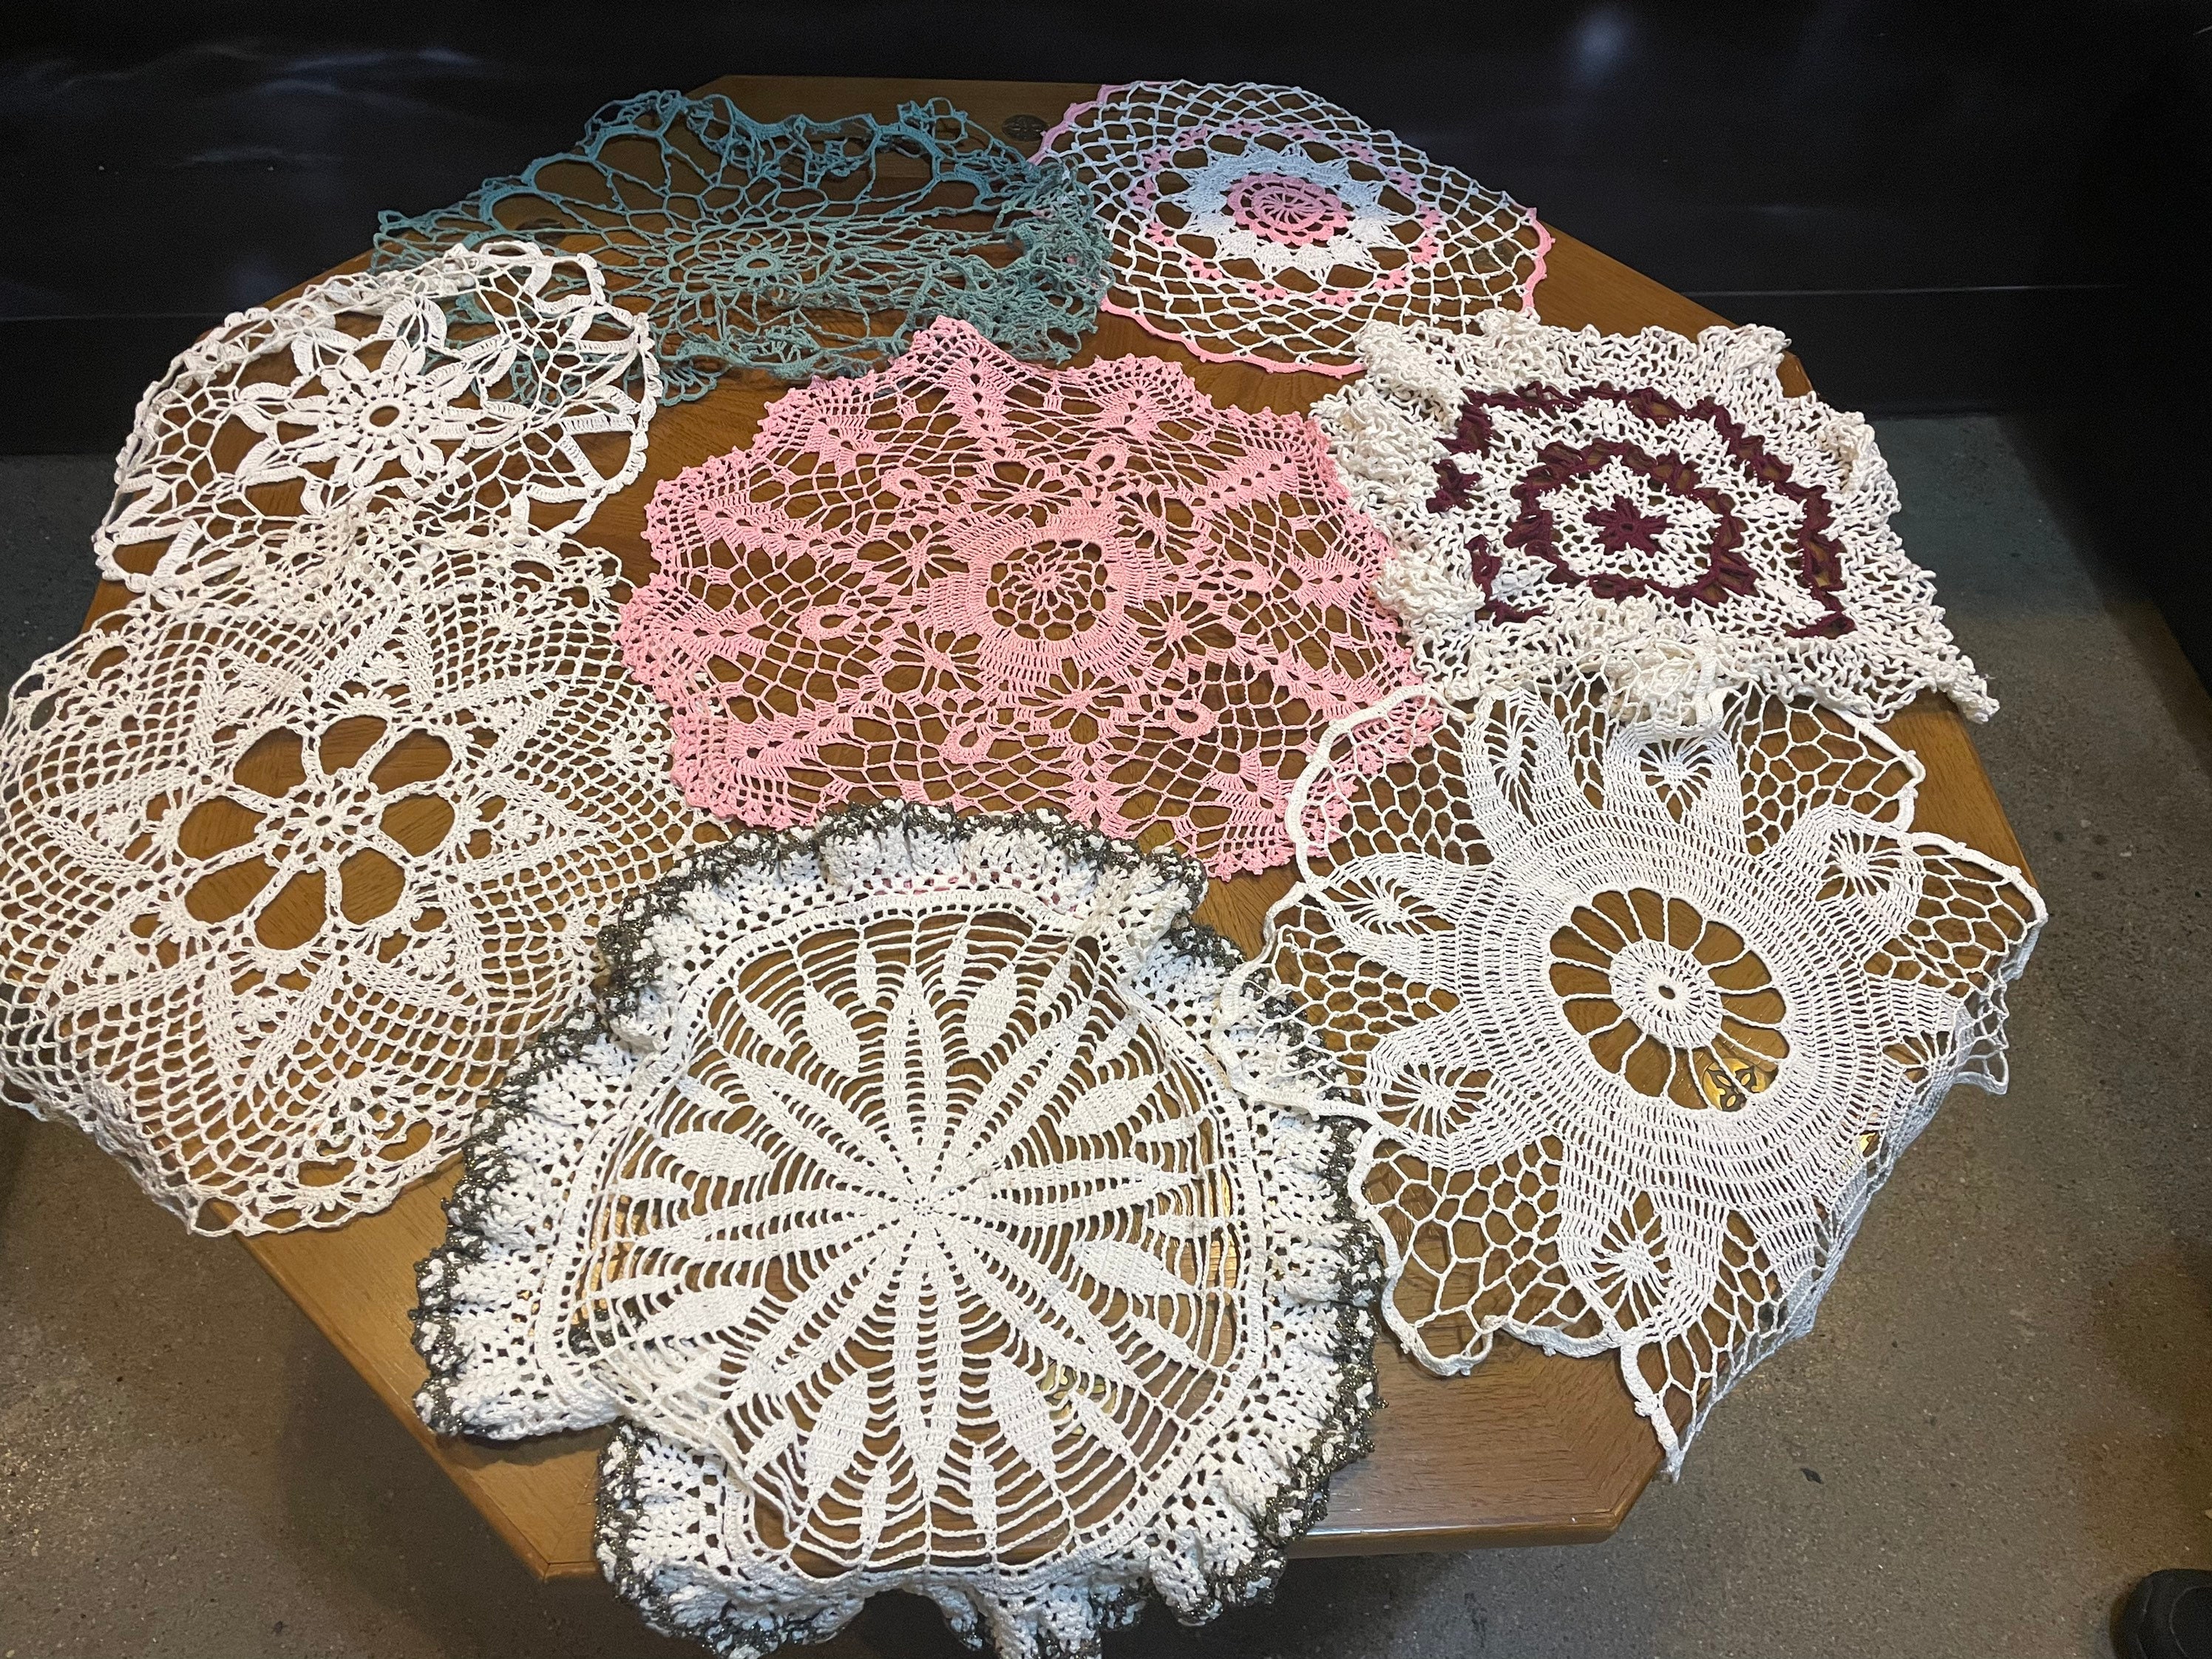 22 Vintage Christmas Paper Lace Doily Pack Assorted Sizes and Patterns Junk  Journal Scrapbook Paper Craft Art Doilies Red Green Crochet 